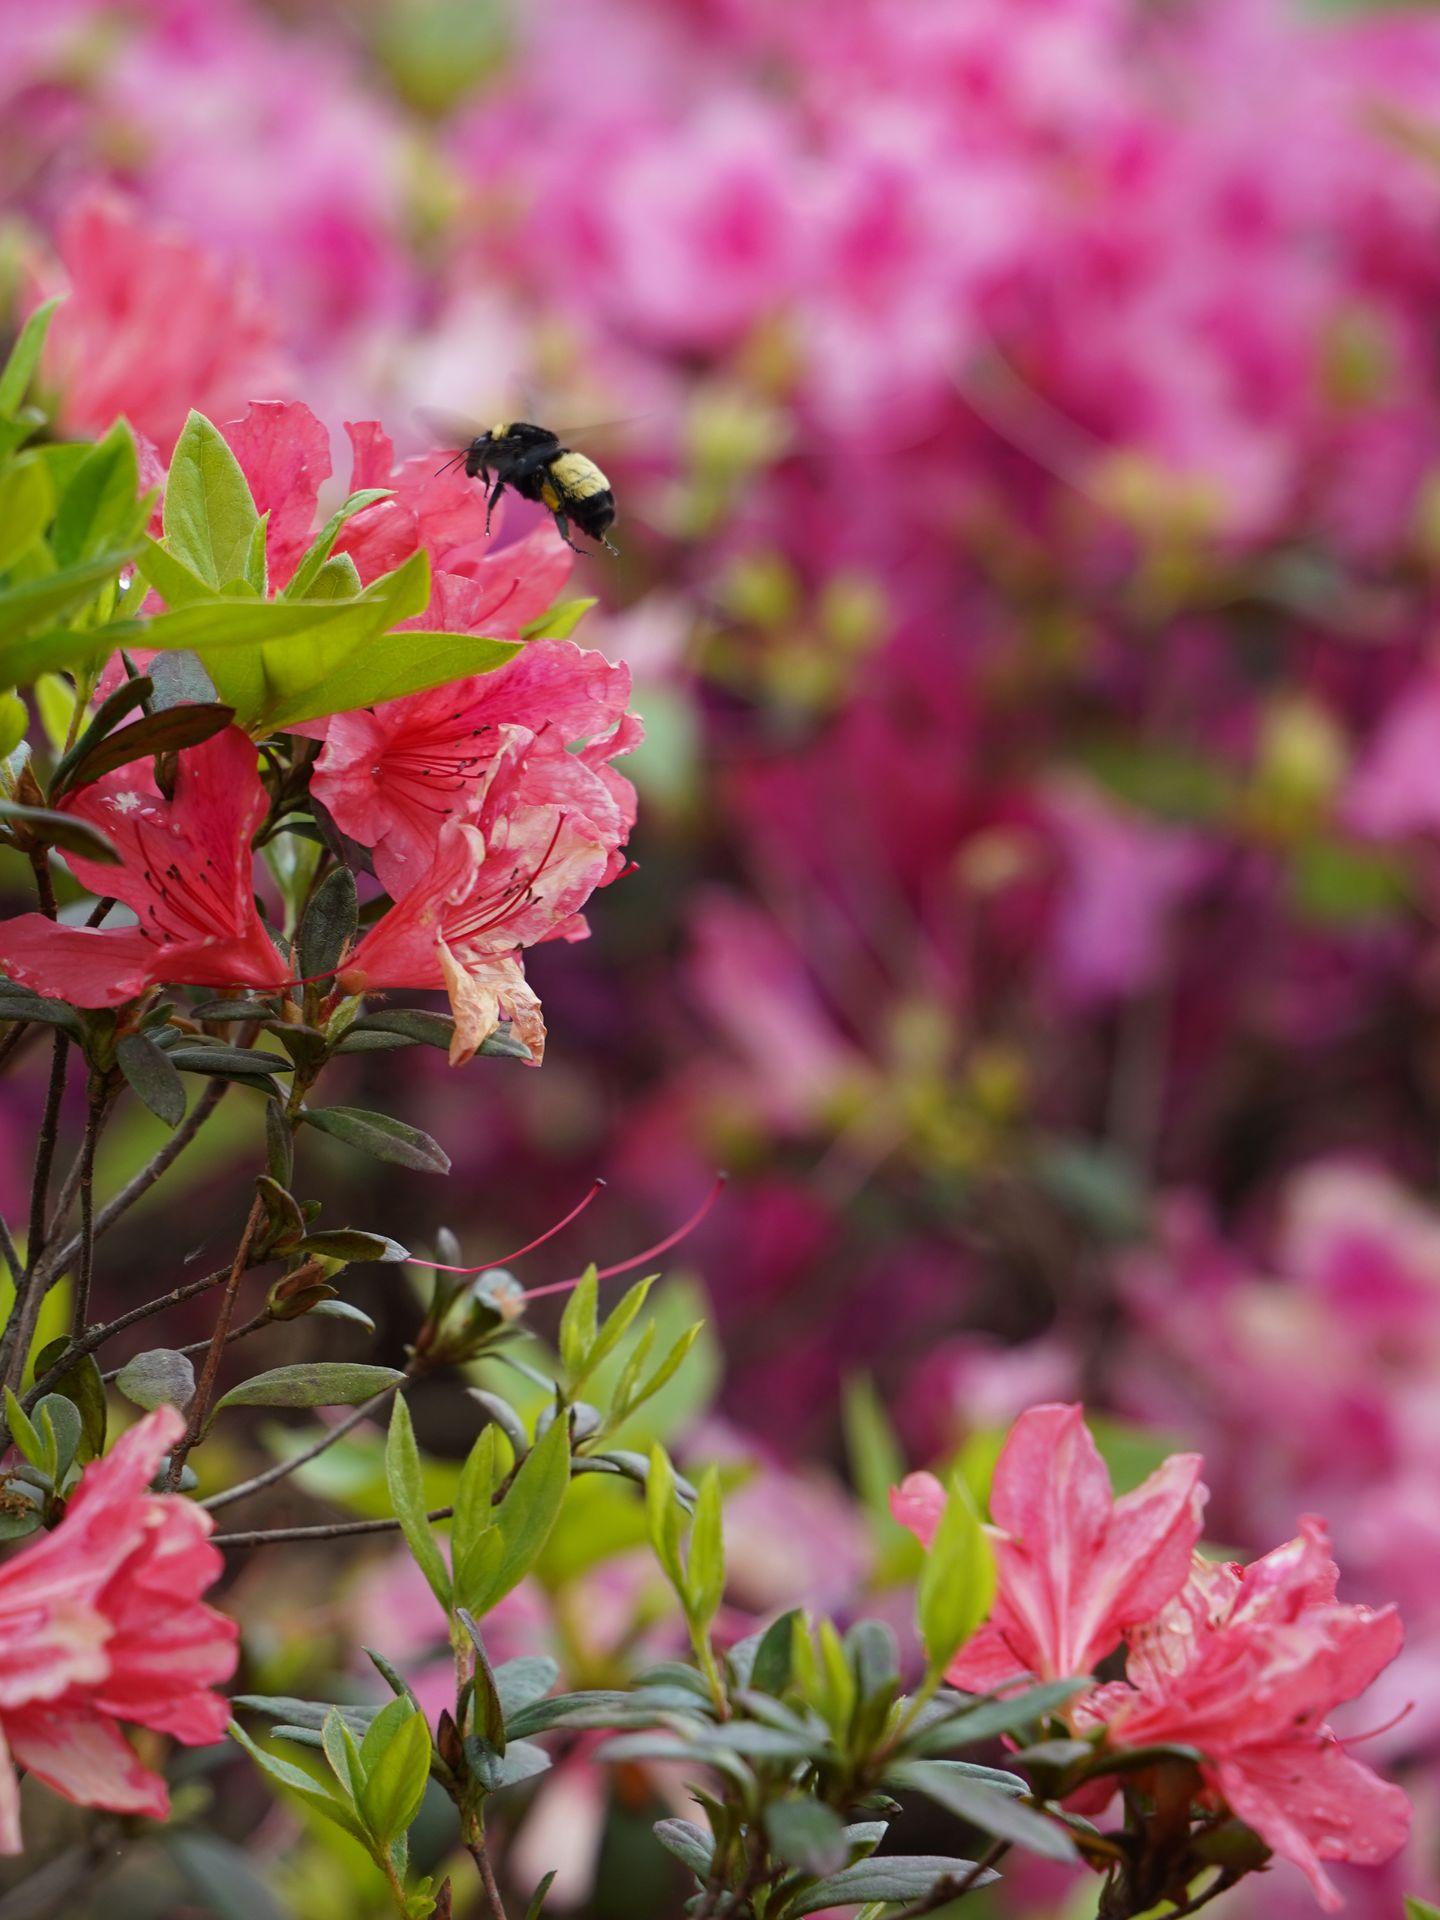 A close up shot of a bee and pink flowers at the Shangri La Botanical Gardens